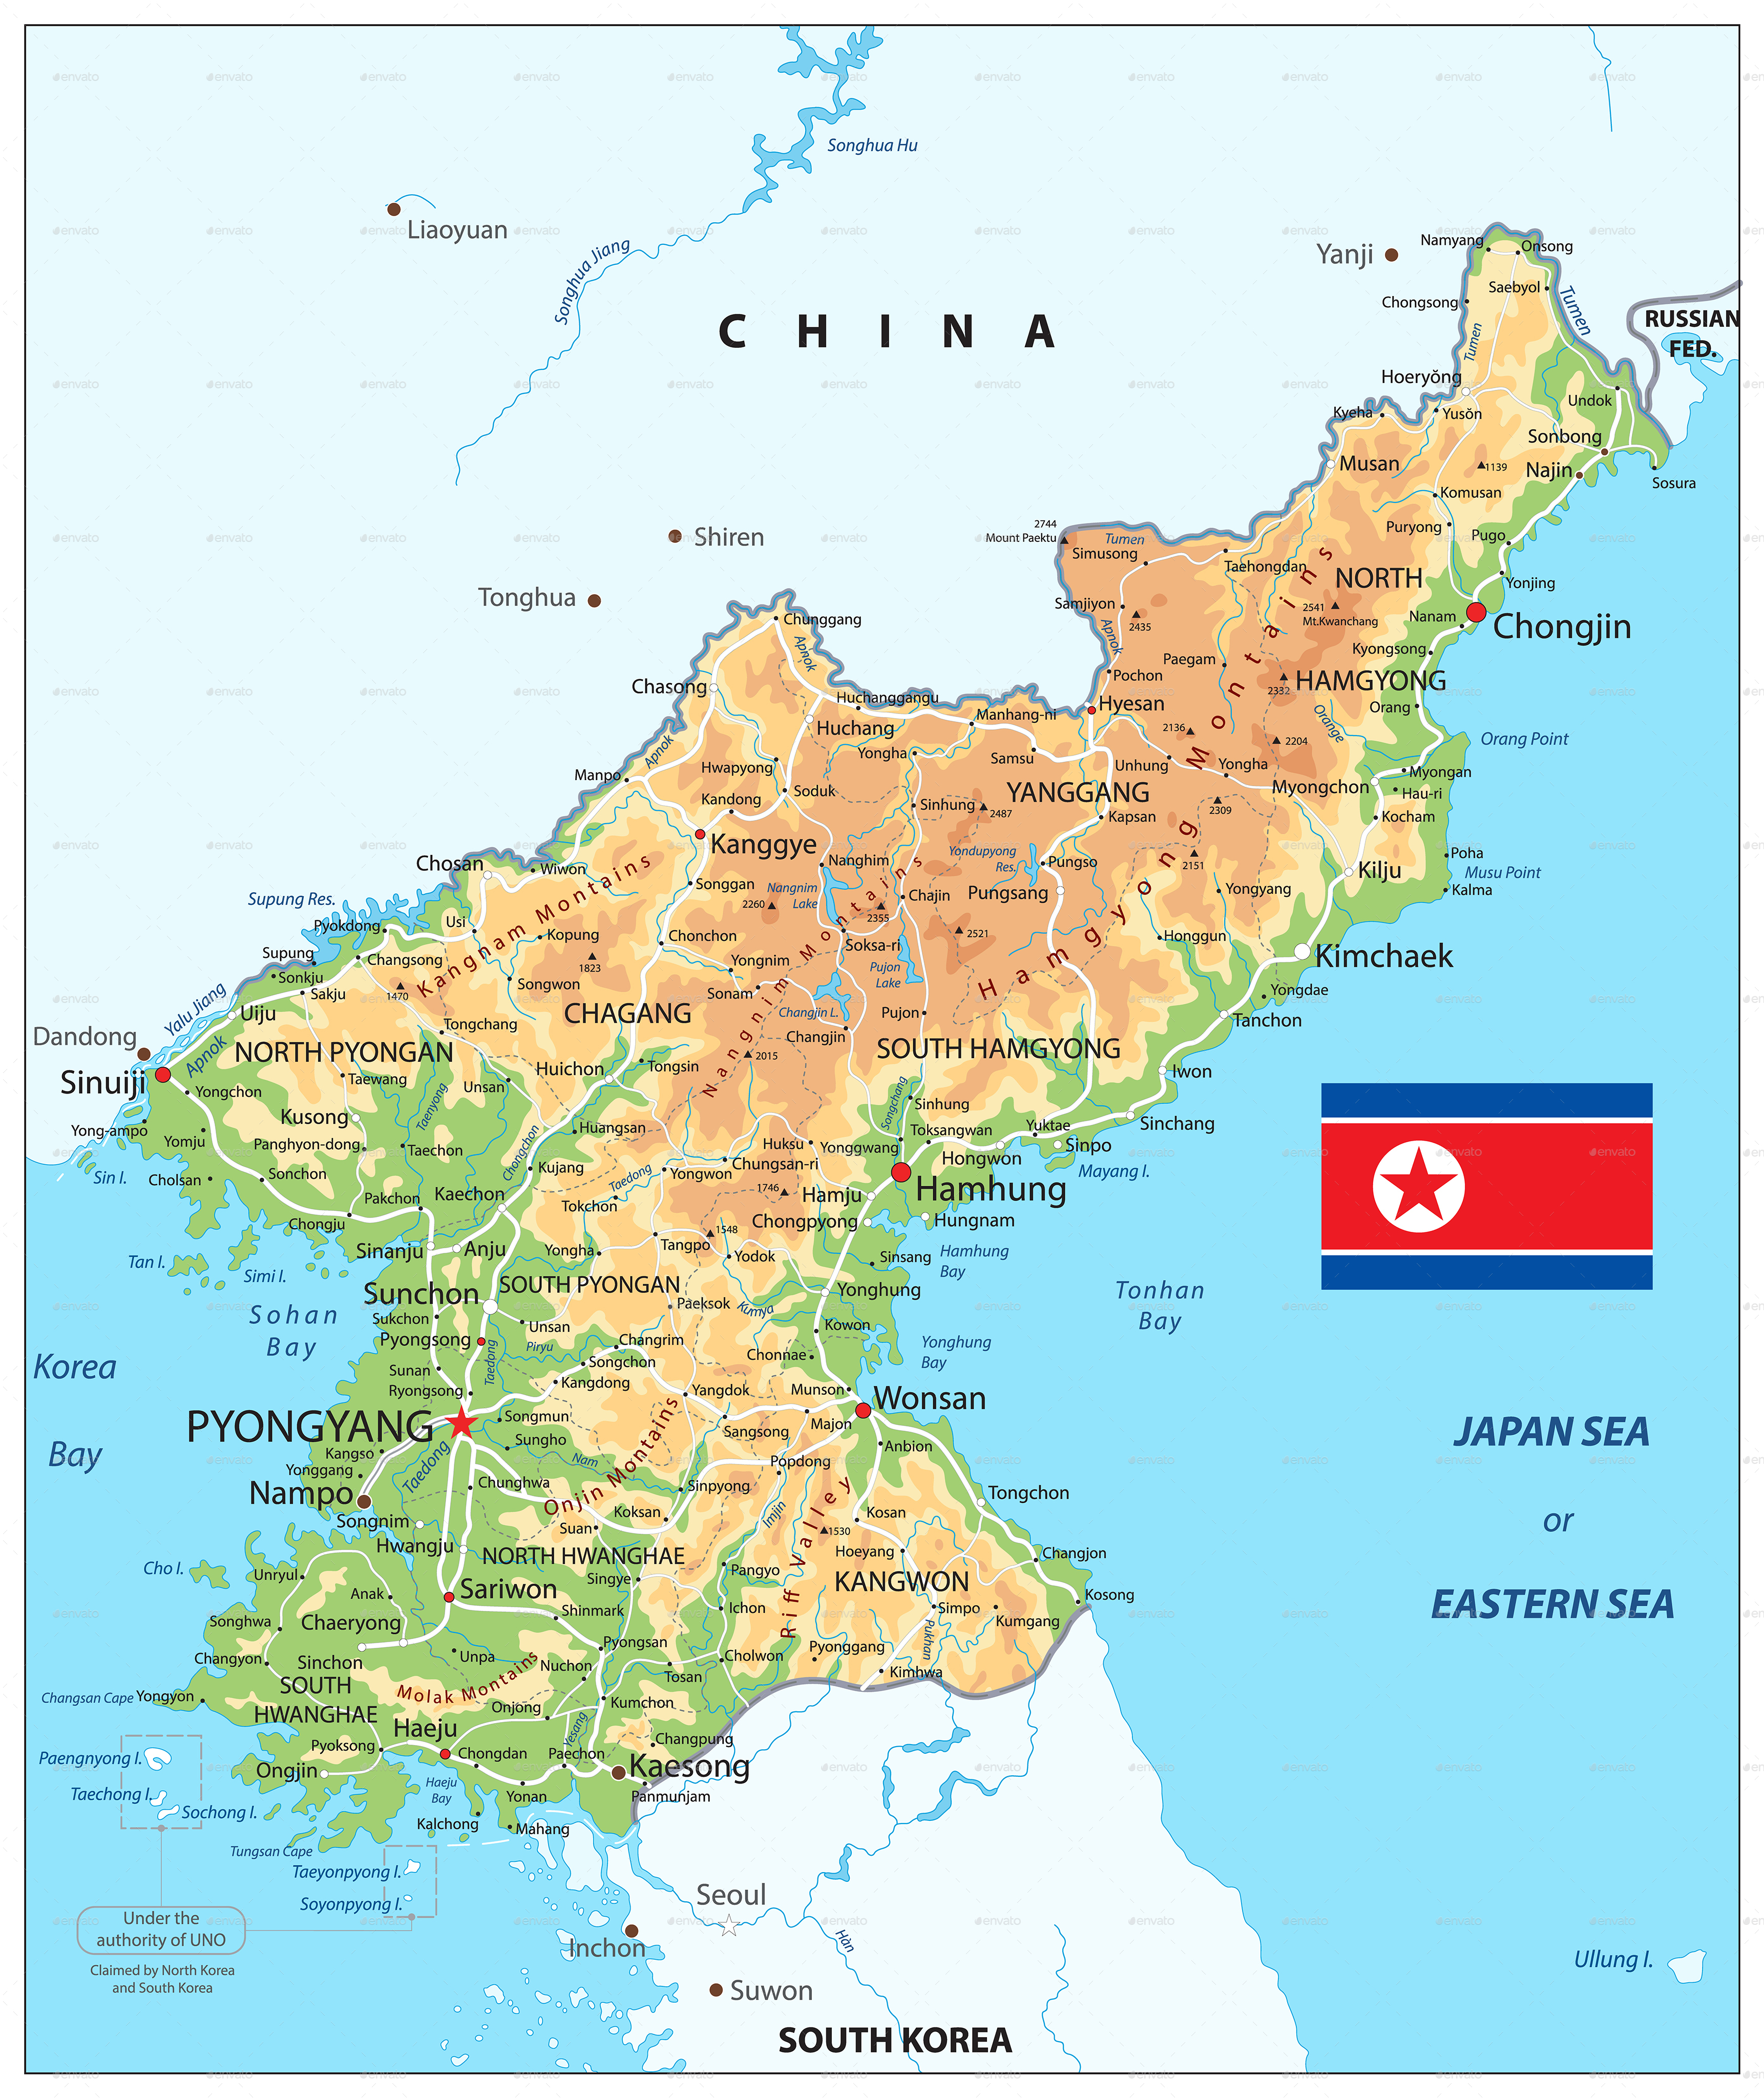 North Korea Physical Map by Cartarium | GraphicRiver